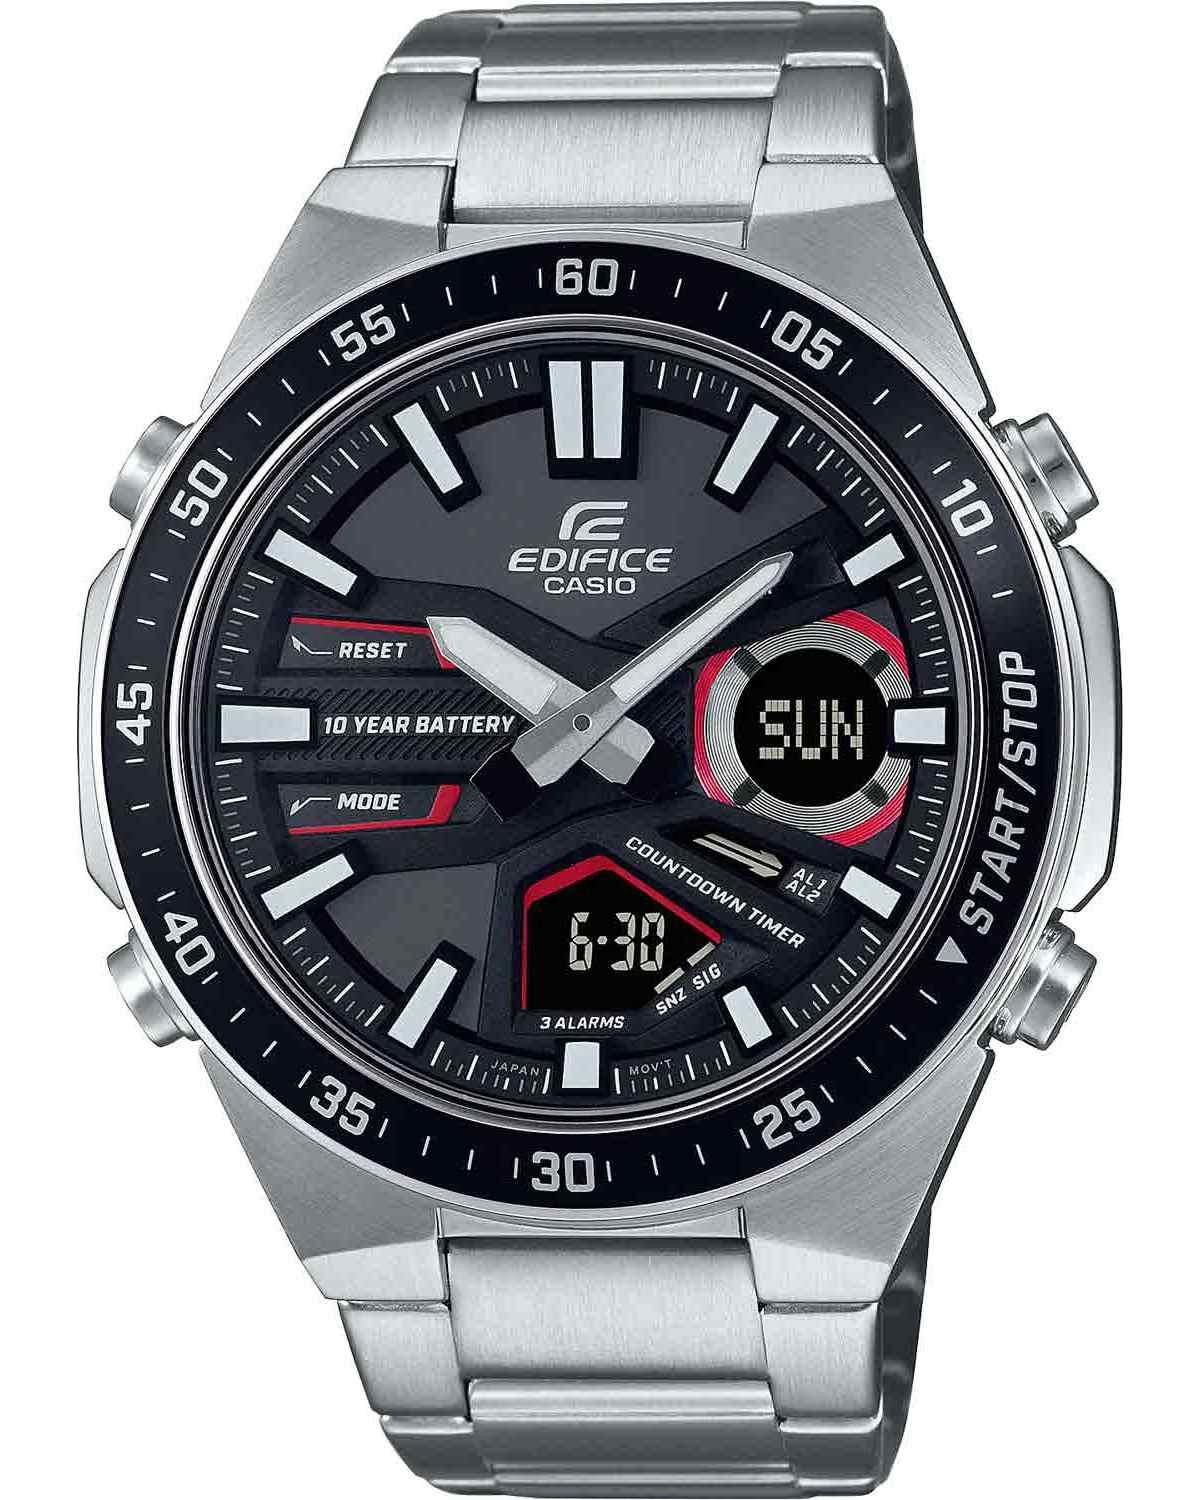 CASIO Edifice Dual Time Chronograph - EFV-C110D-1A4VEF, Silver case with Stainless Steel Bracelet